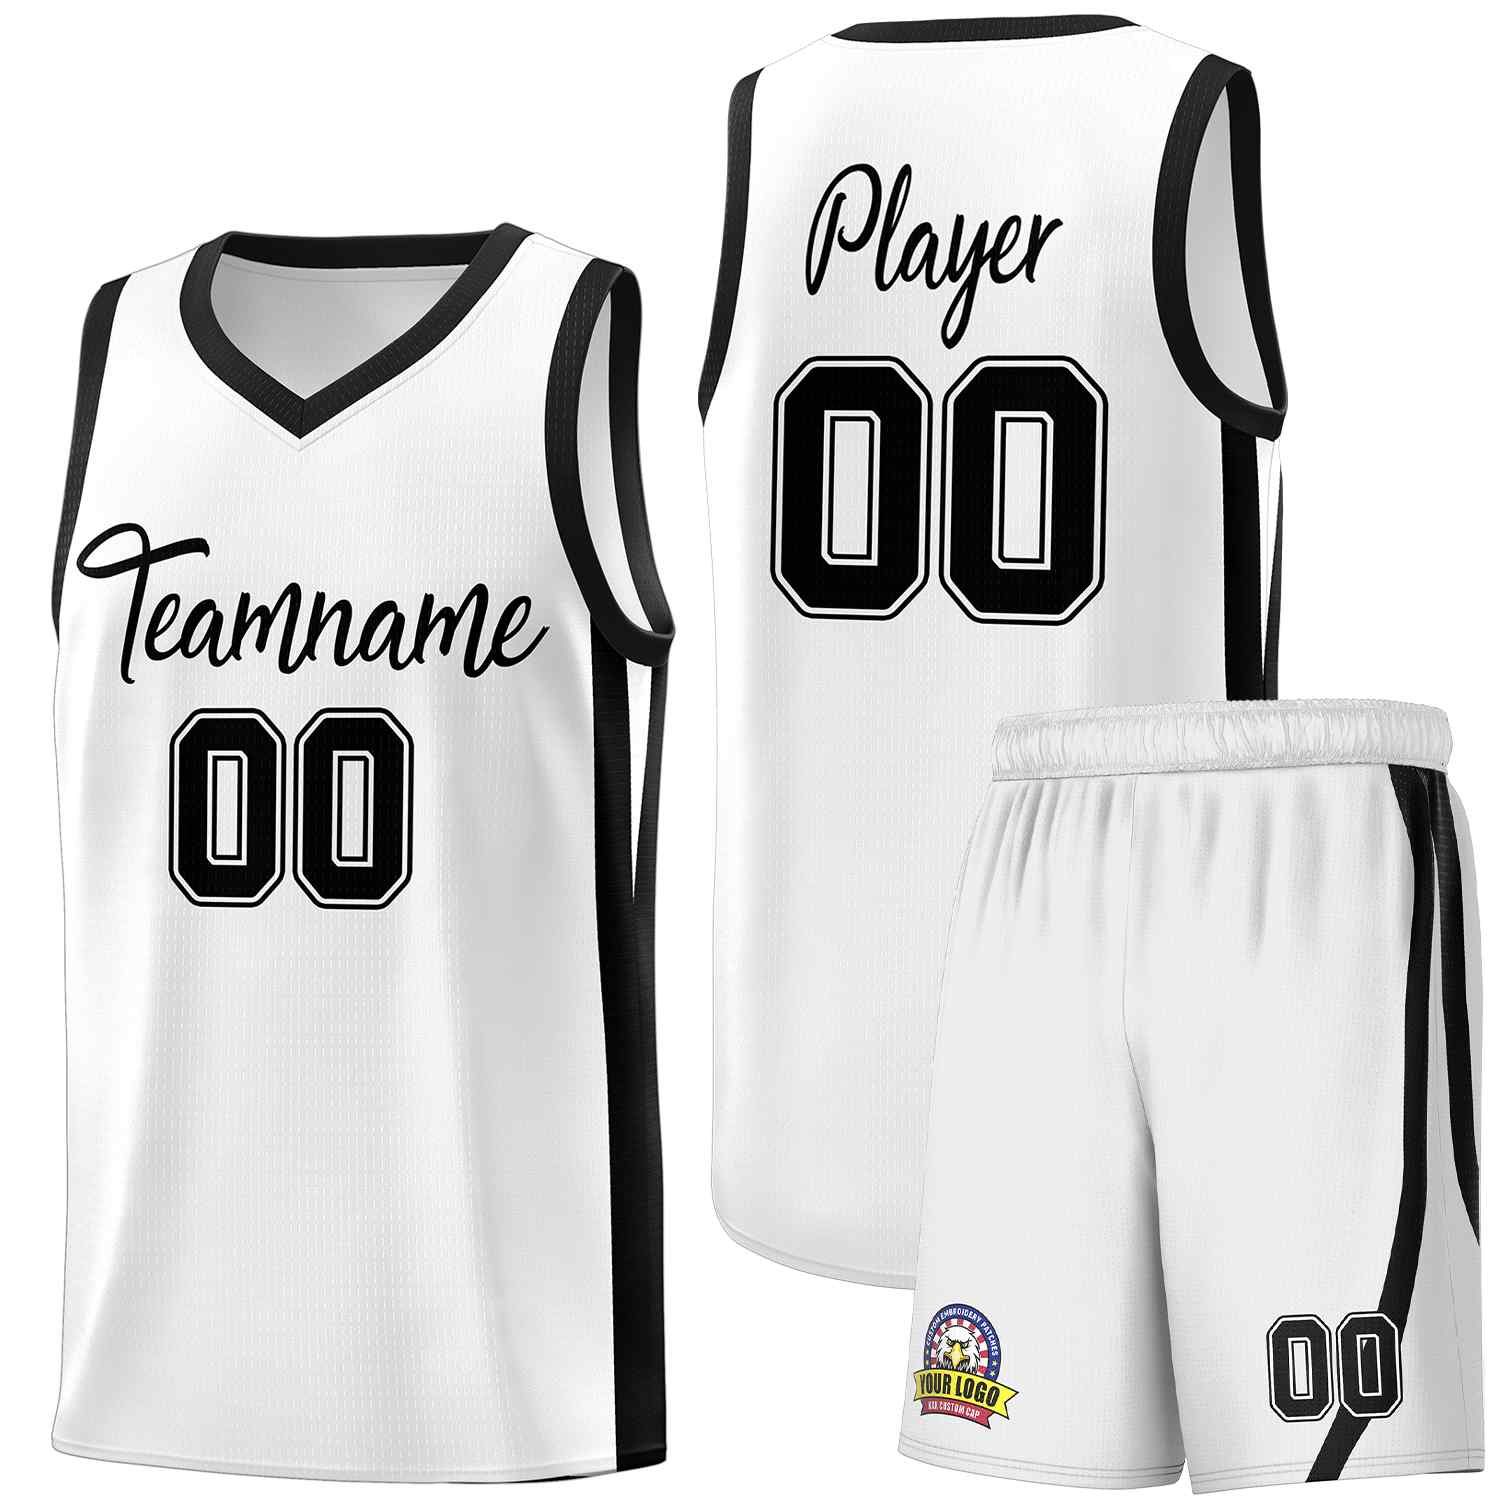 HKsportswear Custom Basketball Jerseys - Black & White Home and Away - Old School Style - Includes Team Name, Player Name and Player Number